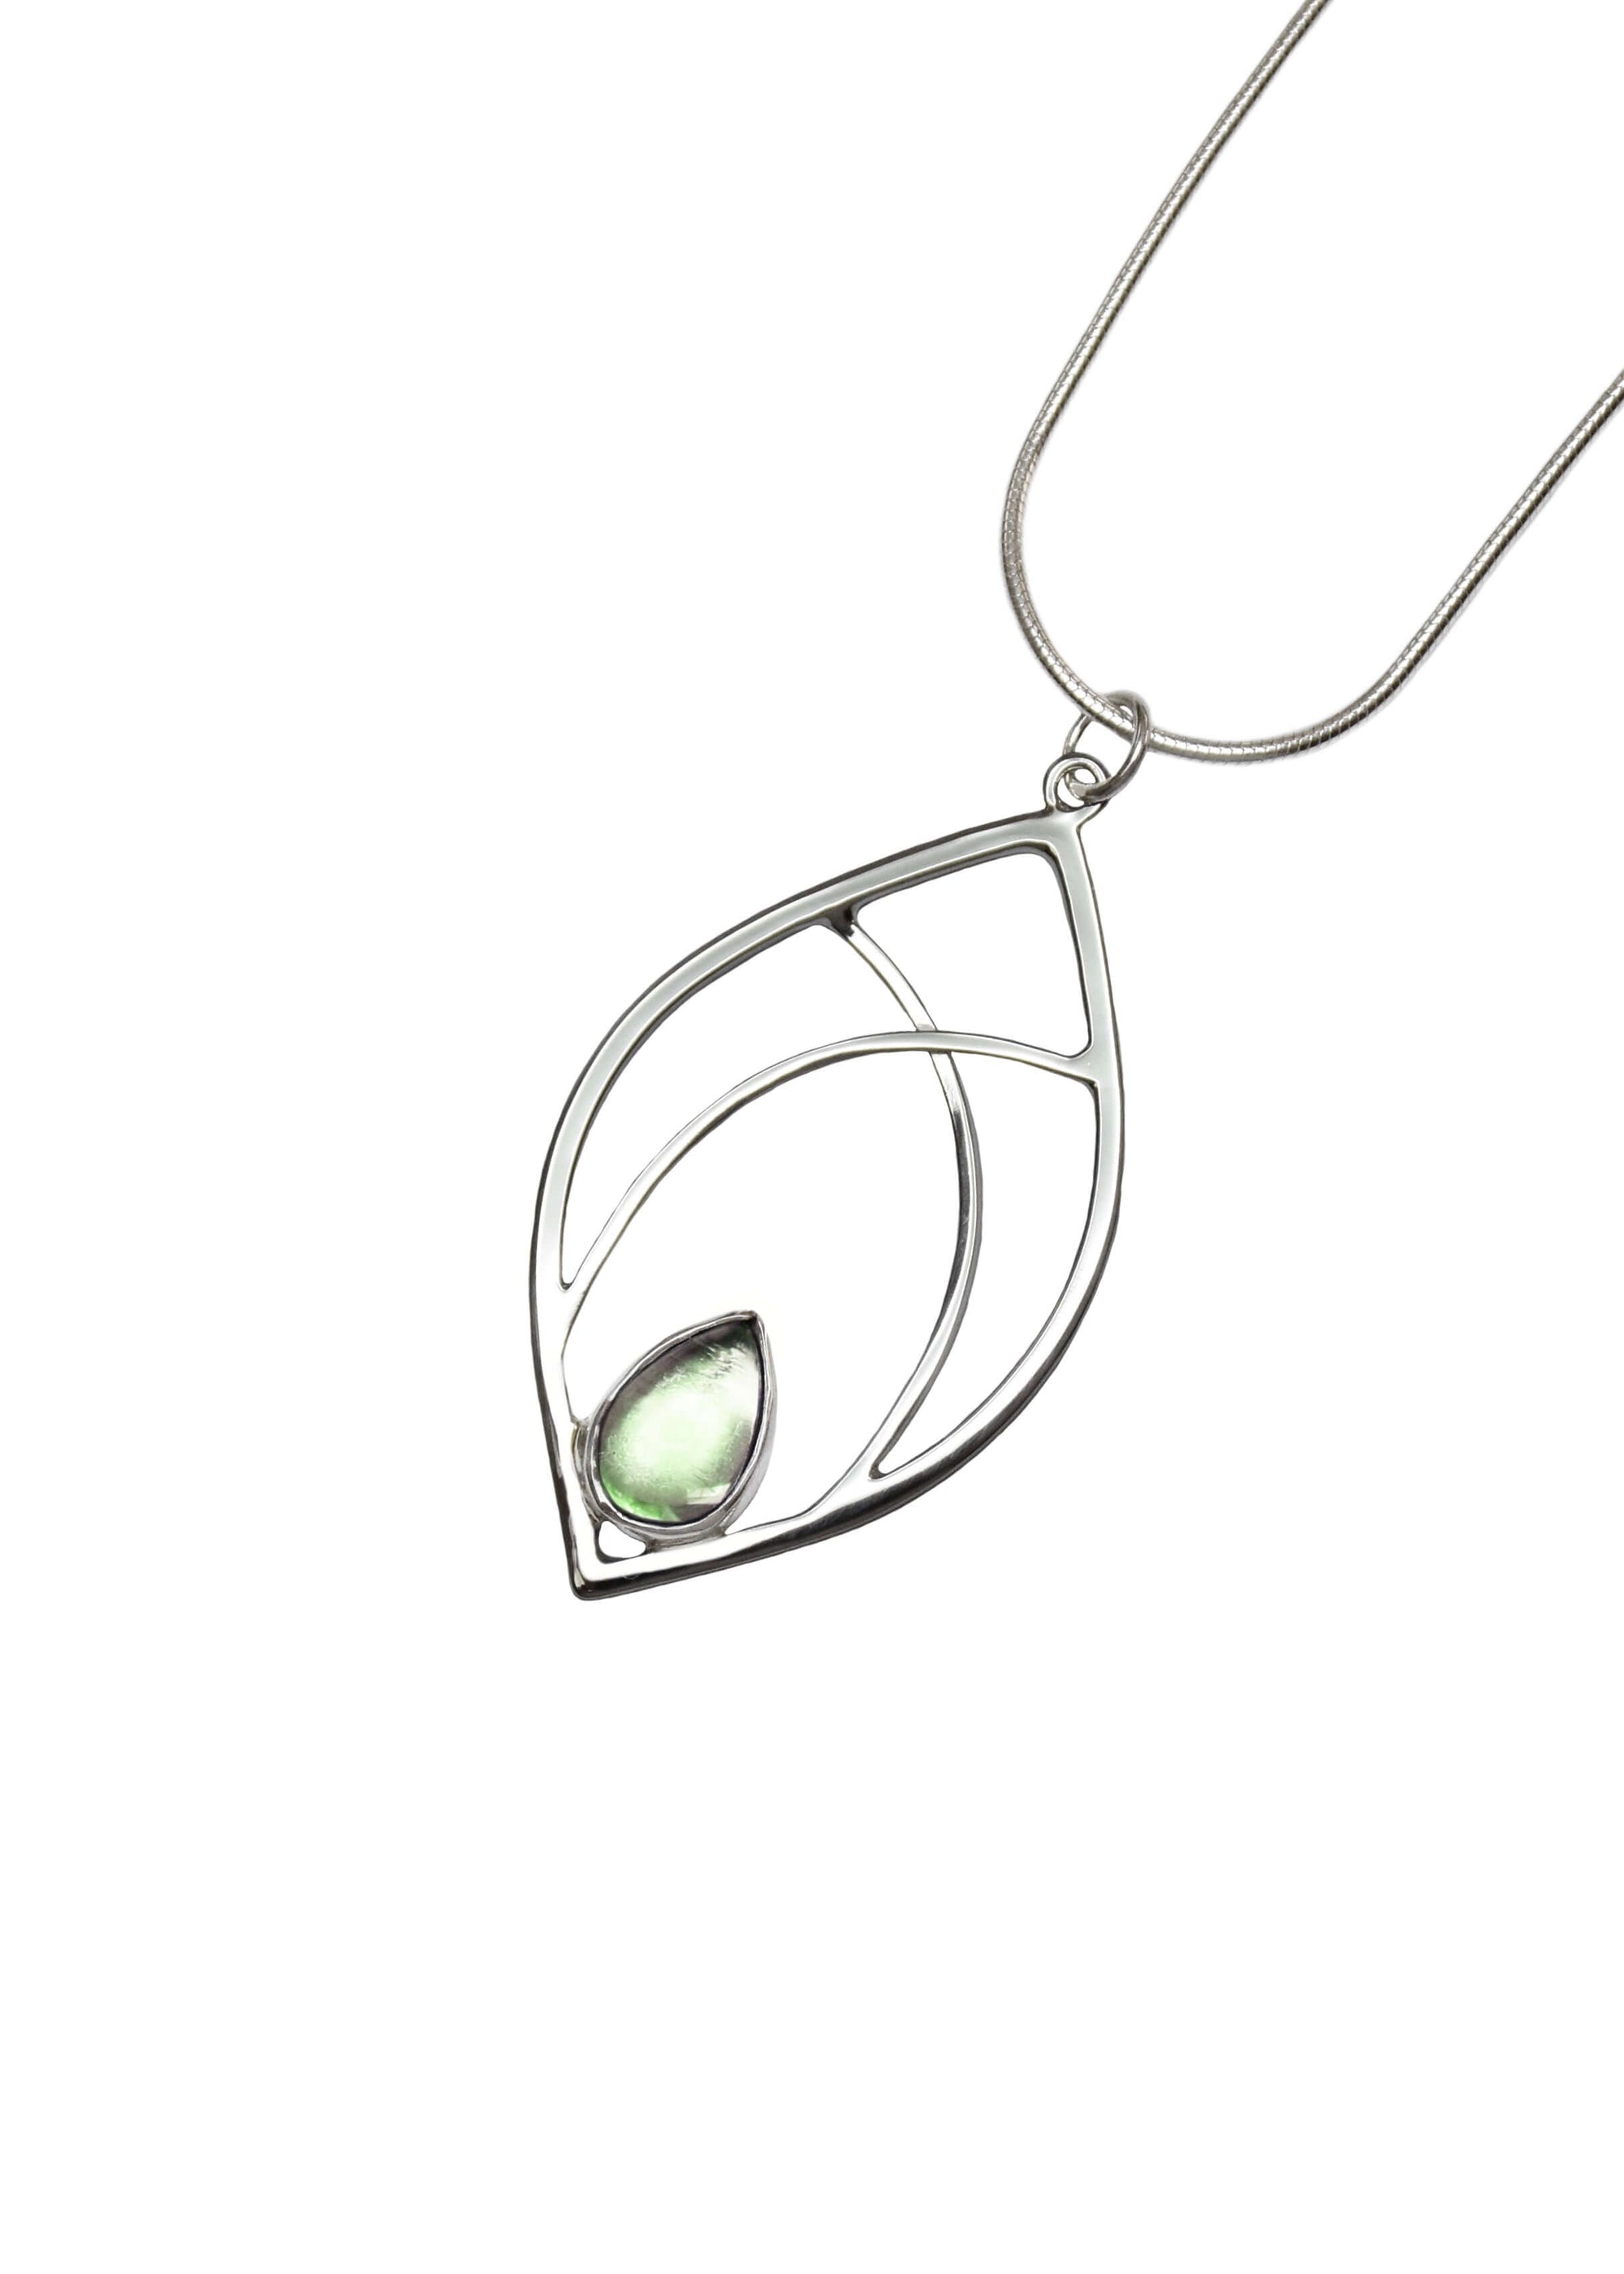 A handmade sterling silver leaf shaped pendant with green prasiolite